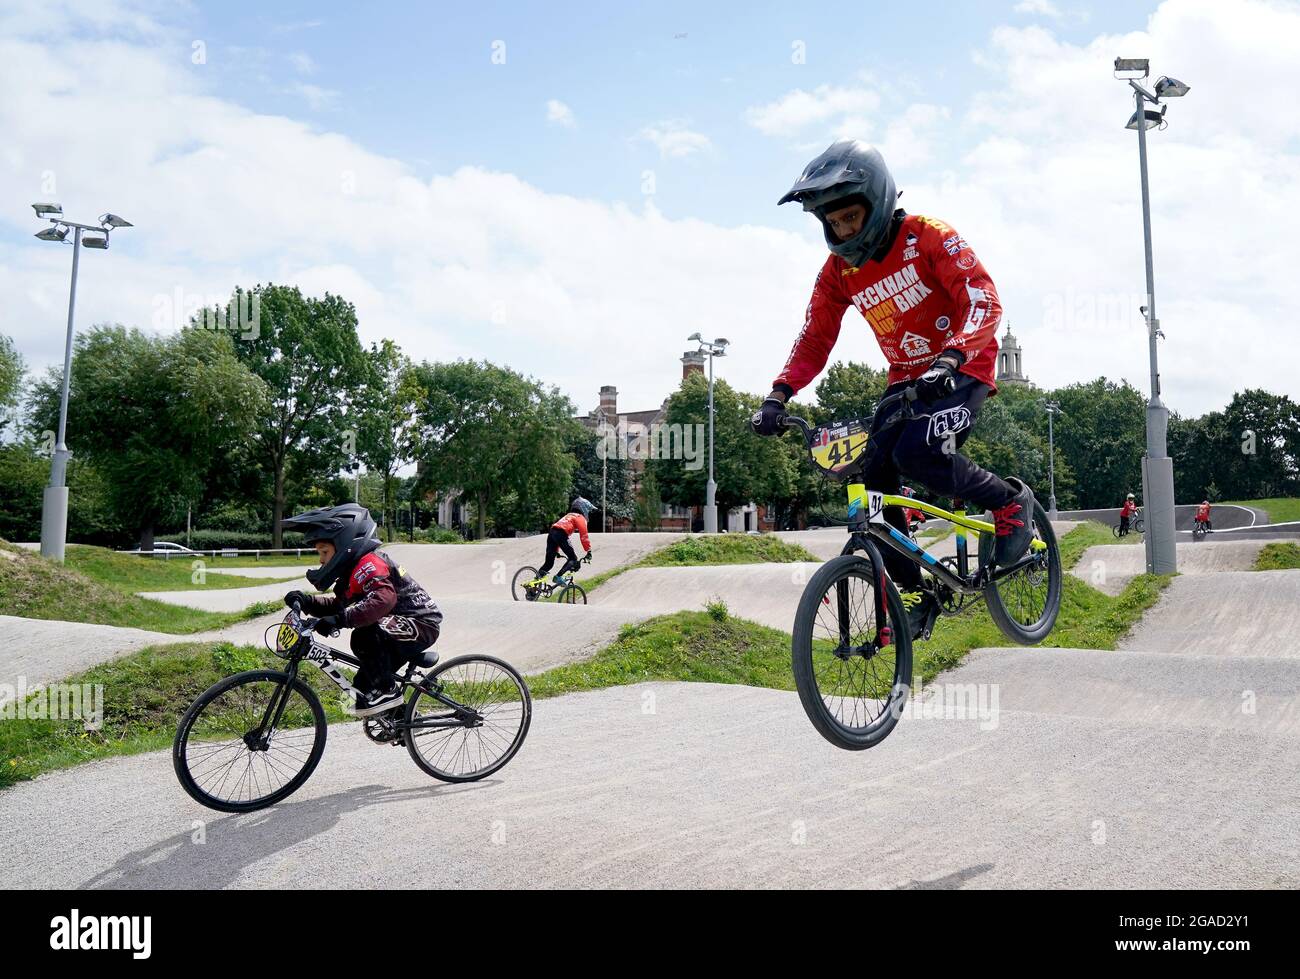 Young riders practice at the Peckham BMX Club at The BMX Track London, in  Burgess Park, south east London following the success of Olympic silver  medallist Kye Whyte. Whyte, 21, grew up